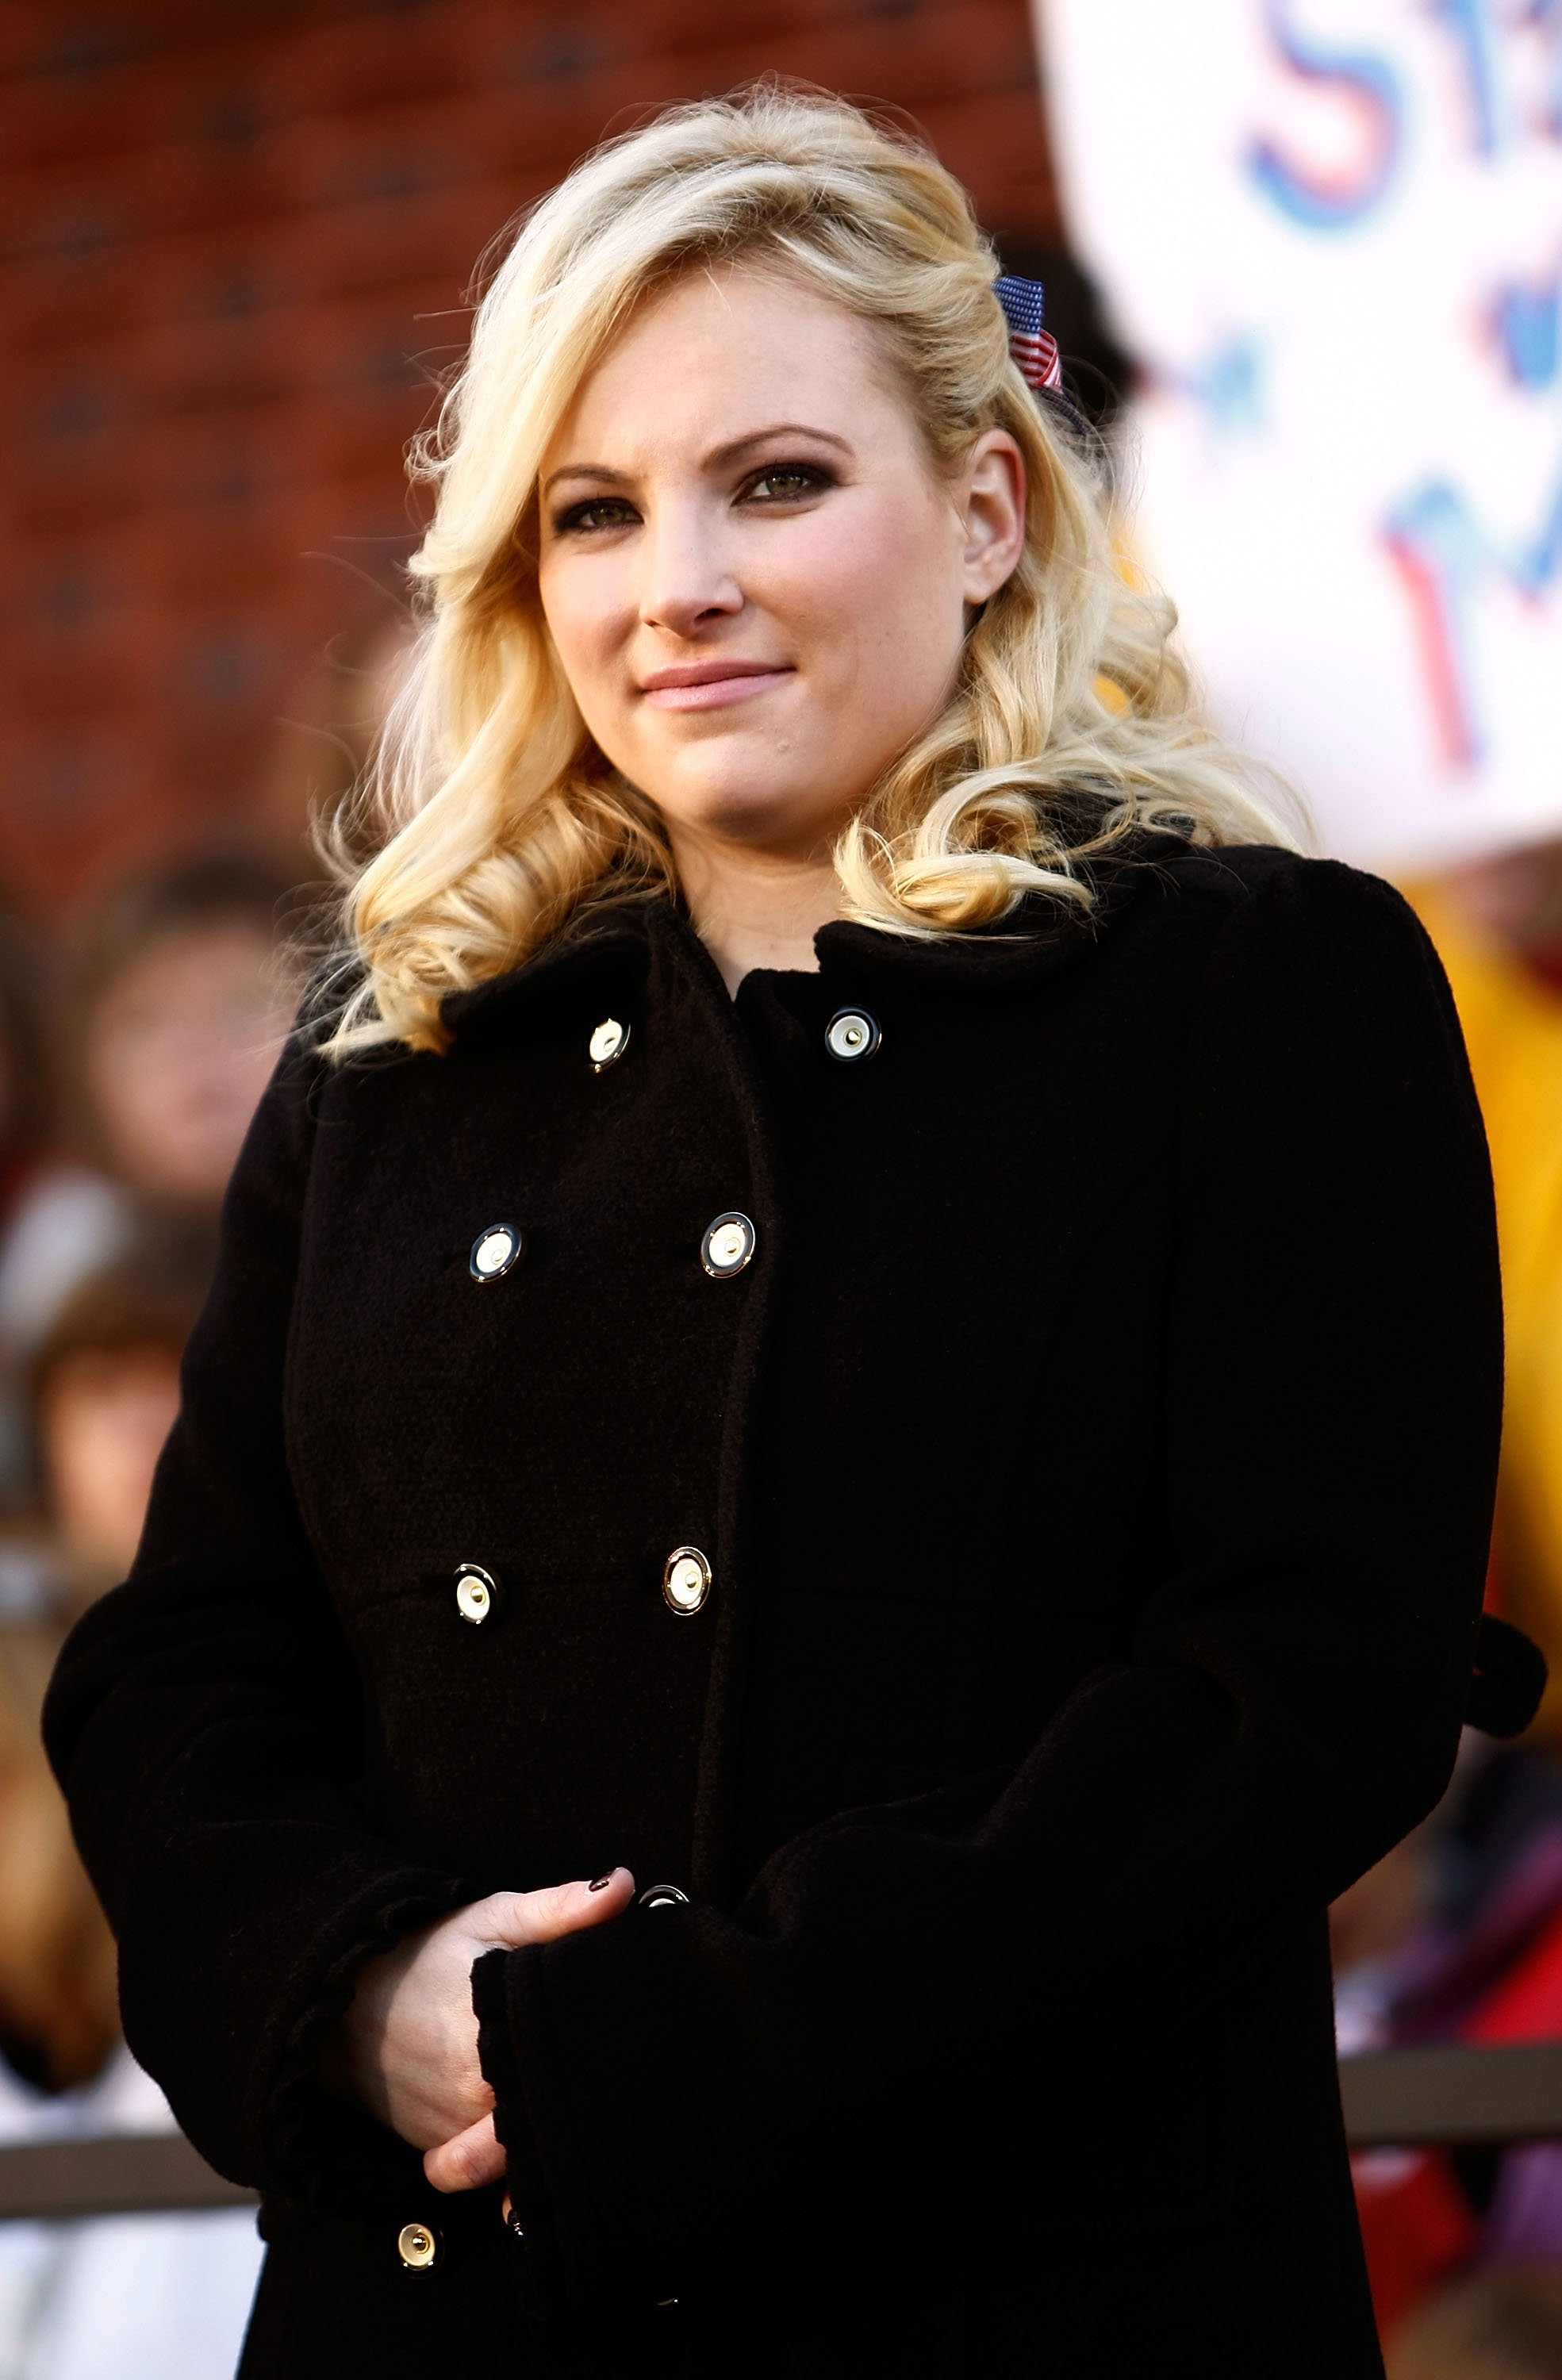 Meghan McCain attends a campaign rally at Defiance Junior High School in Ohio on October 30, 2008 | Photo: Getty Images